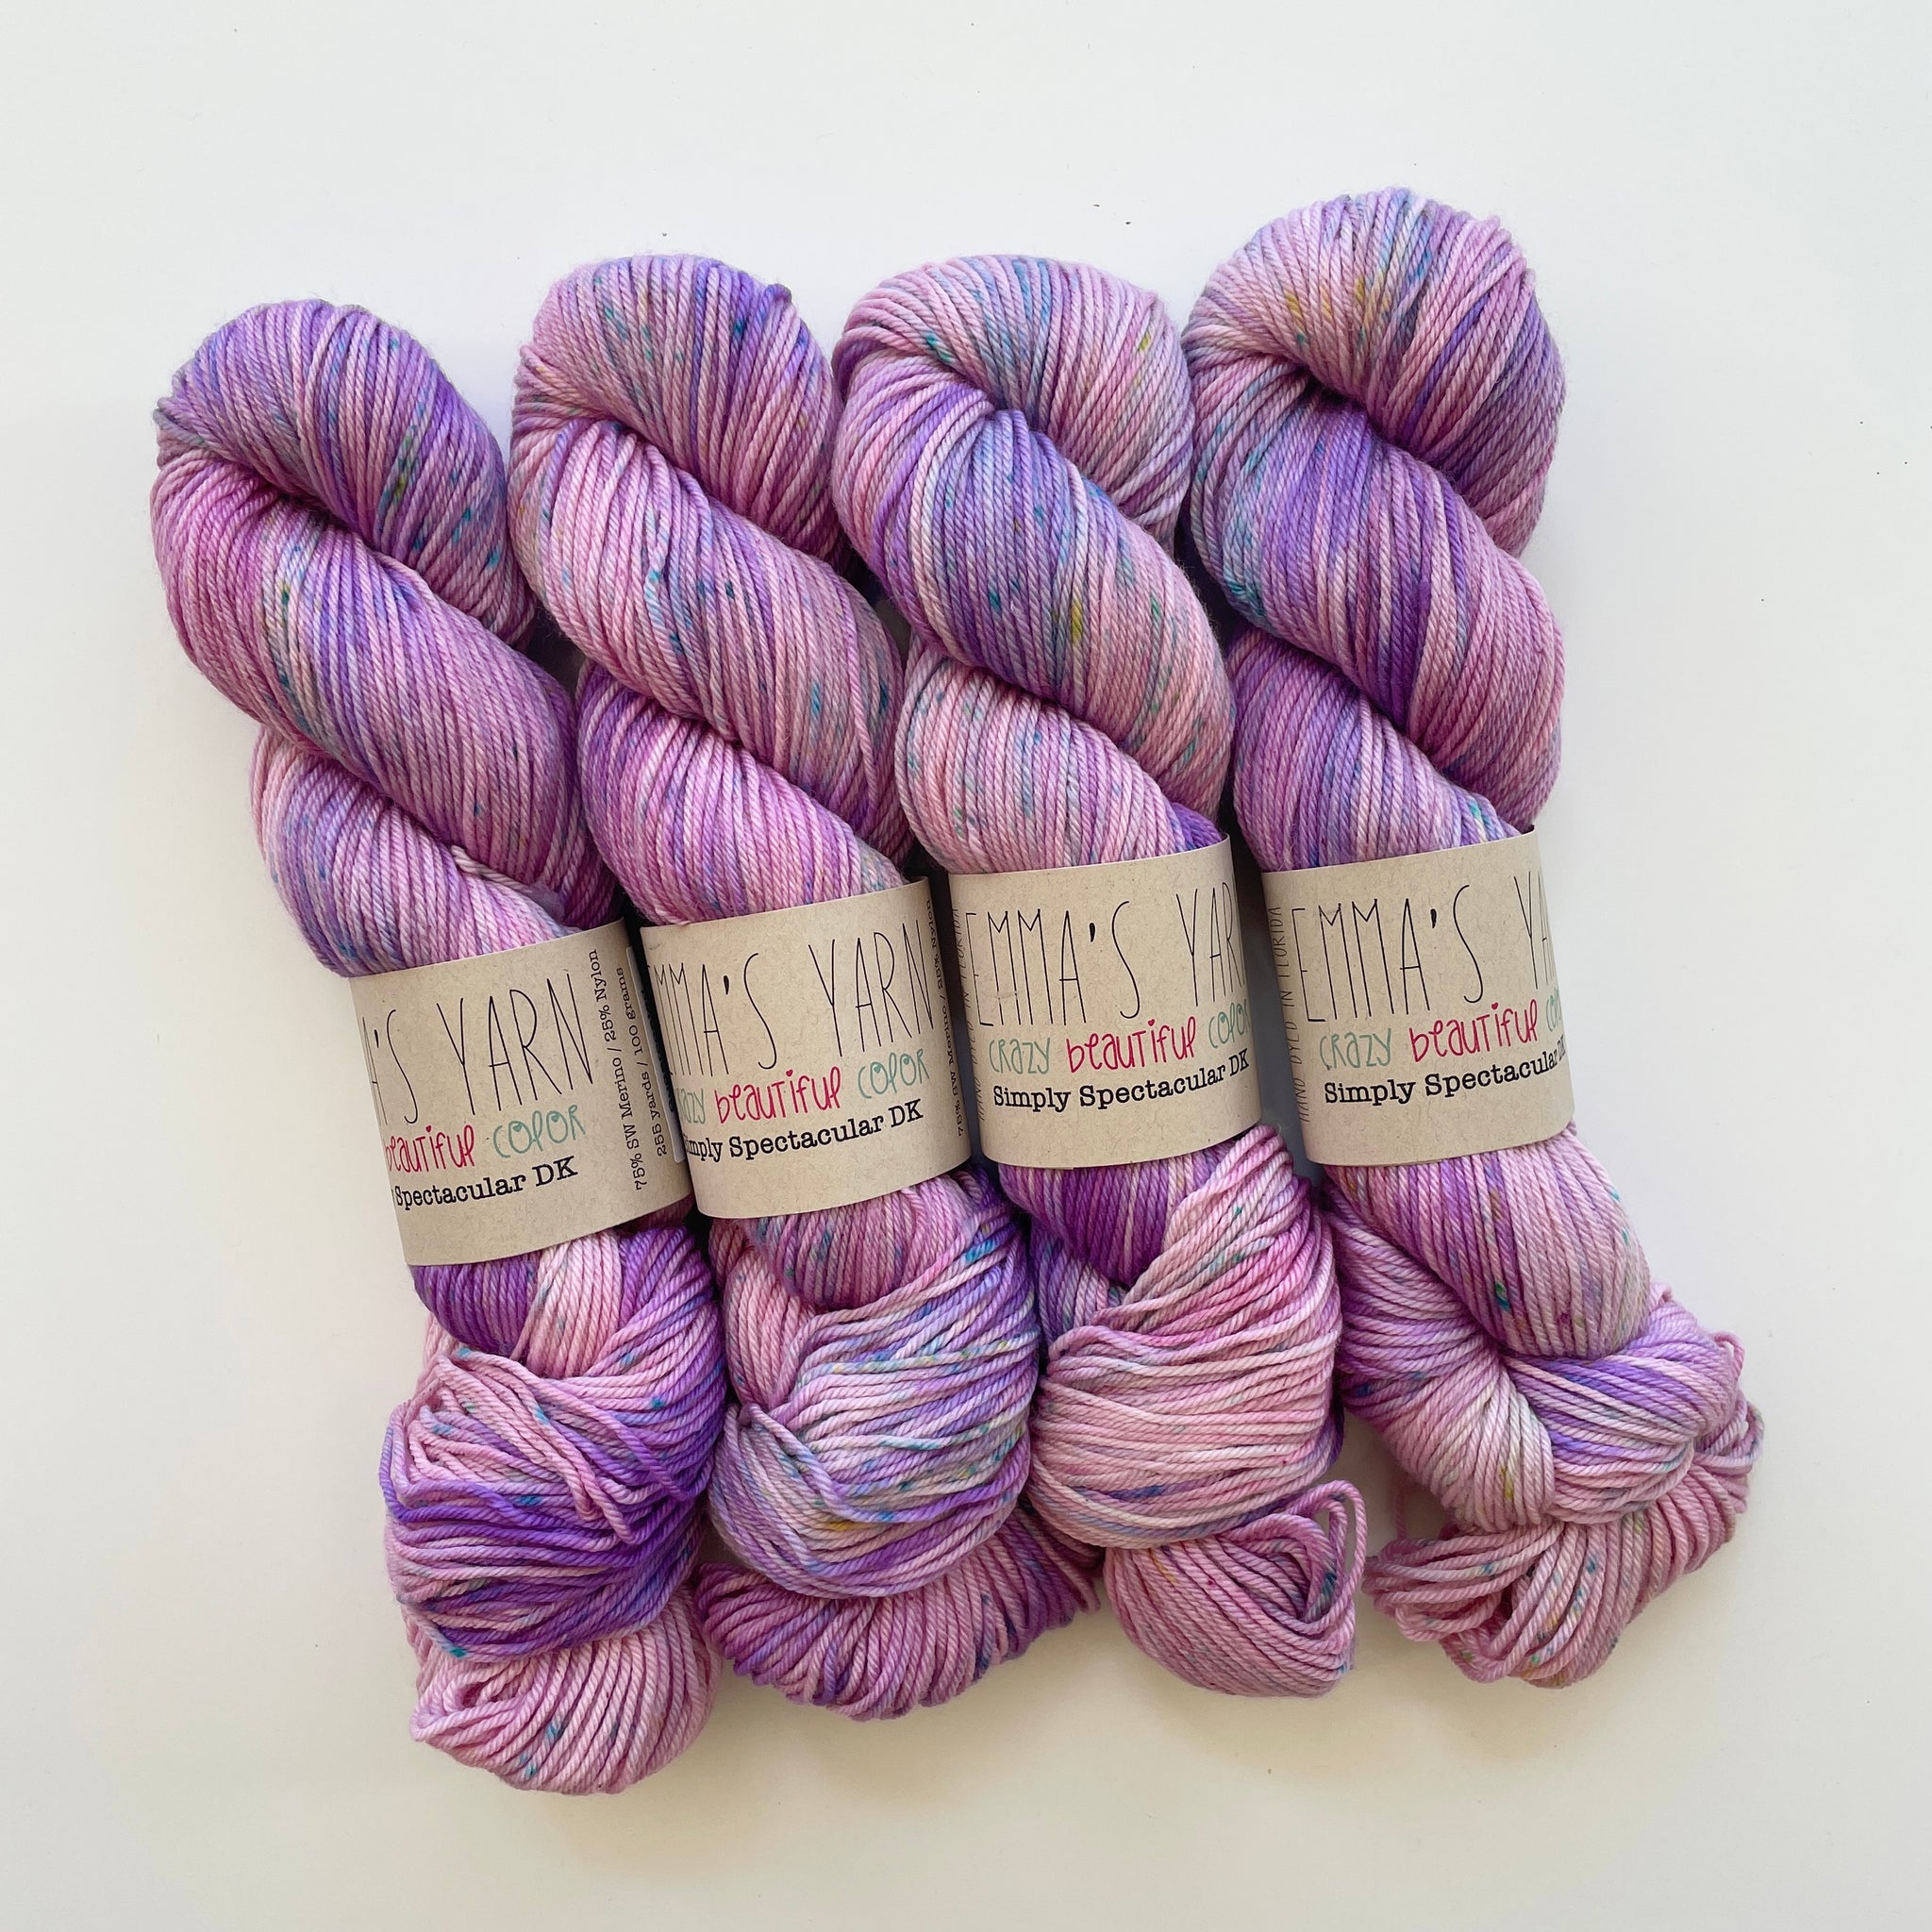 Sugarcoated - Simply Spectacular DK SMALLS (3)